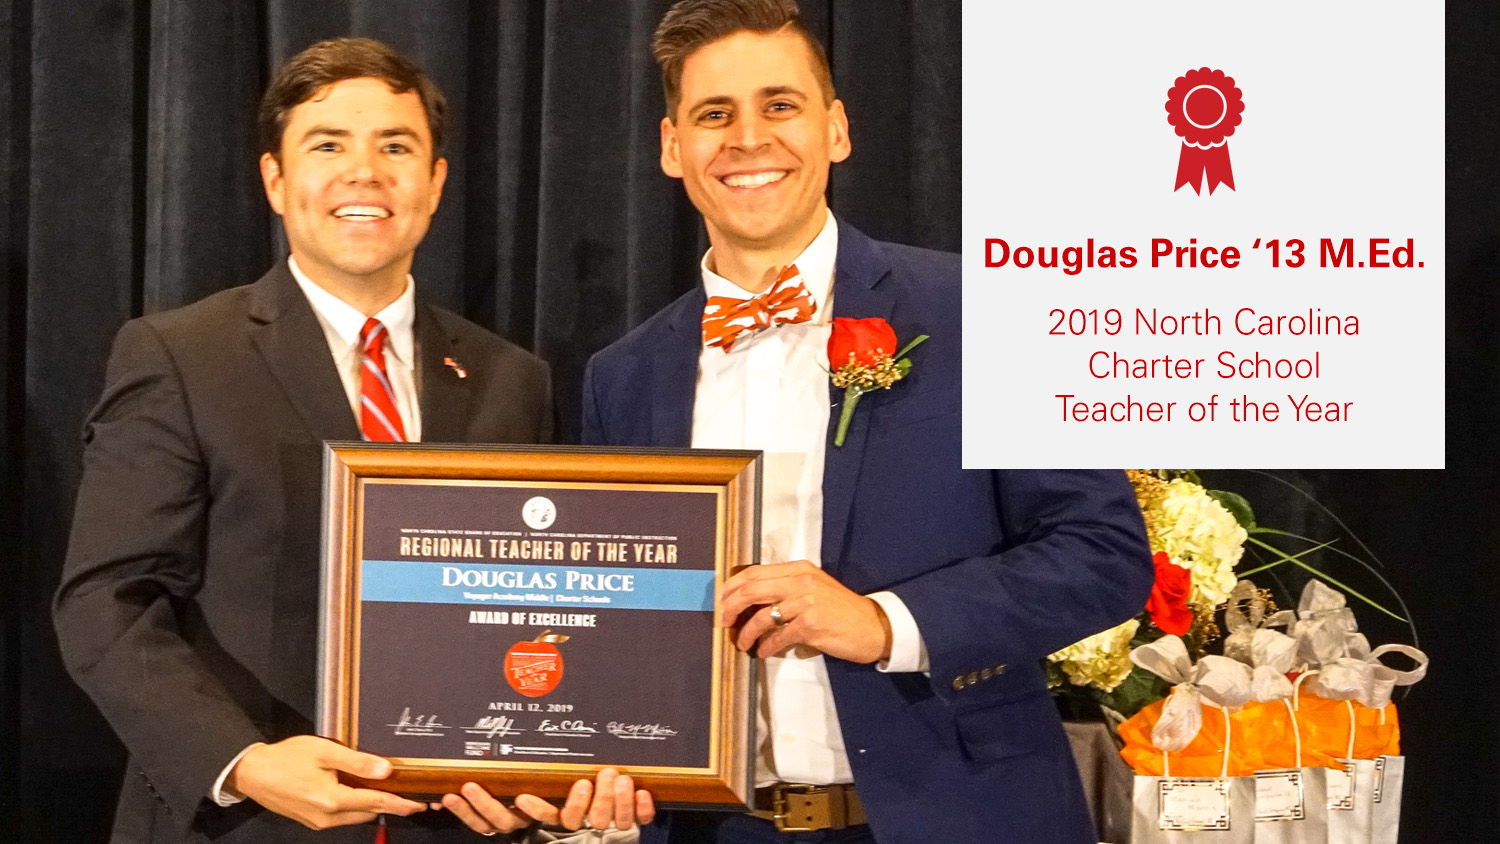 Douglas Price '13, NC Charter School Teacher of the Year, stands with State Superintendent Mark Johnson